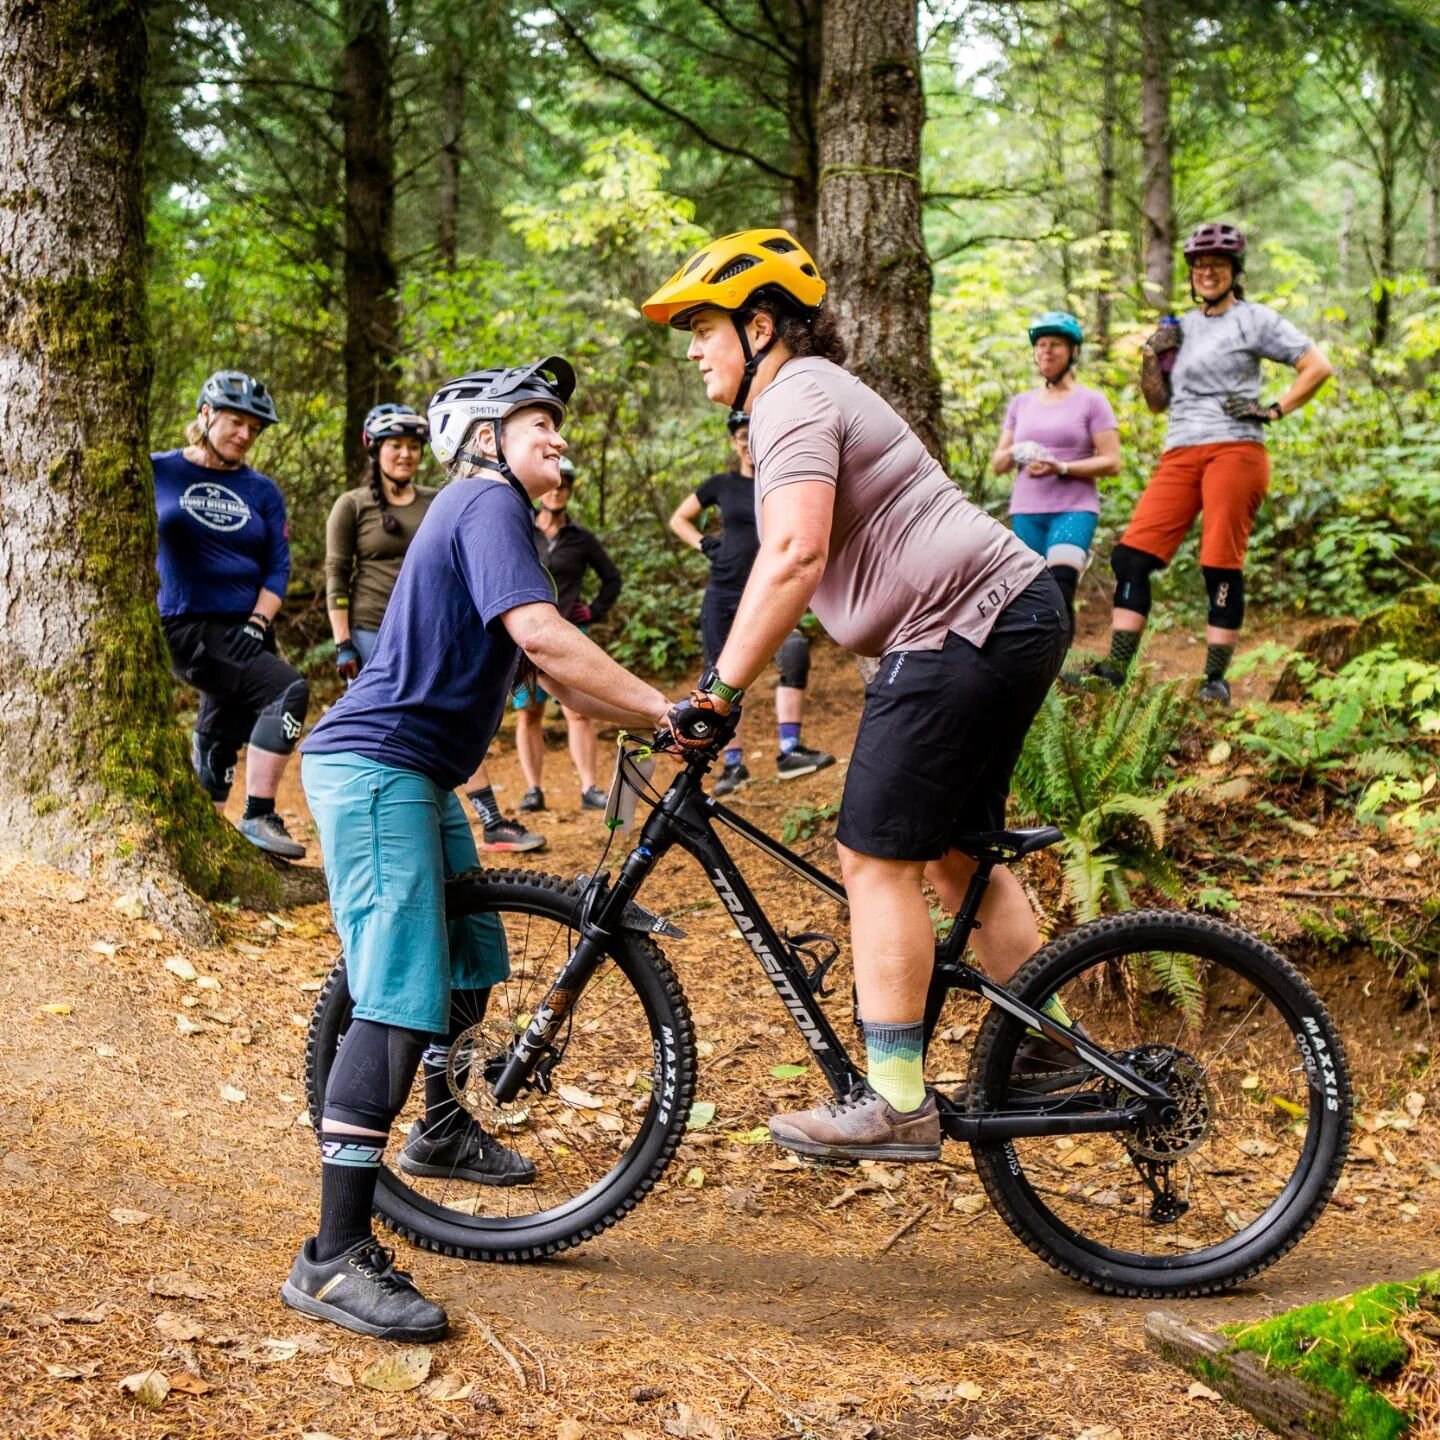 Come see what all the hype is about! 
Registration is now open for our award-winning Transition Women's Weekend East!&nbsp;

Happening in Henderson, NC, at Ride Kanuga Bike Park (@ride_kanuga ),&nbsp;May 17th - 19th

All skill levels welcome!

TR Wom